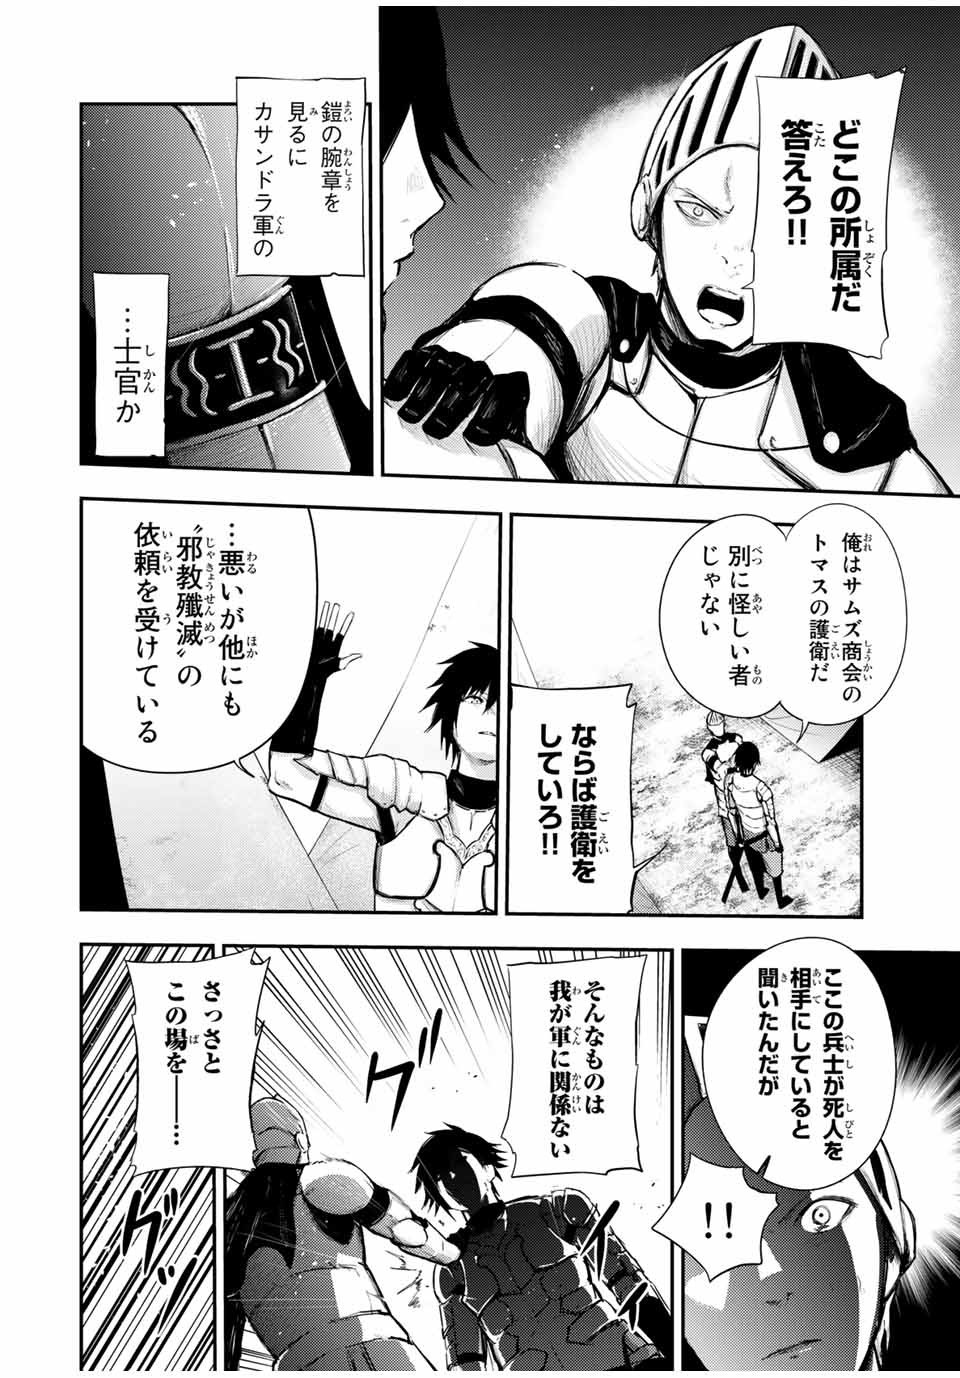 the strongest former prince-; 奴隷転生 ～その奴隷、最強の元王子につき～ 第27話 - Page 10